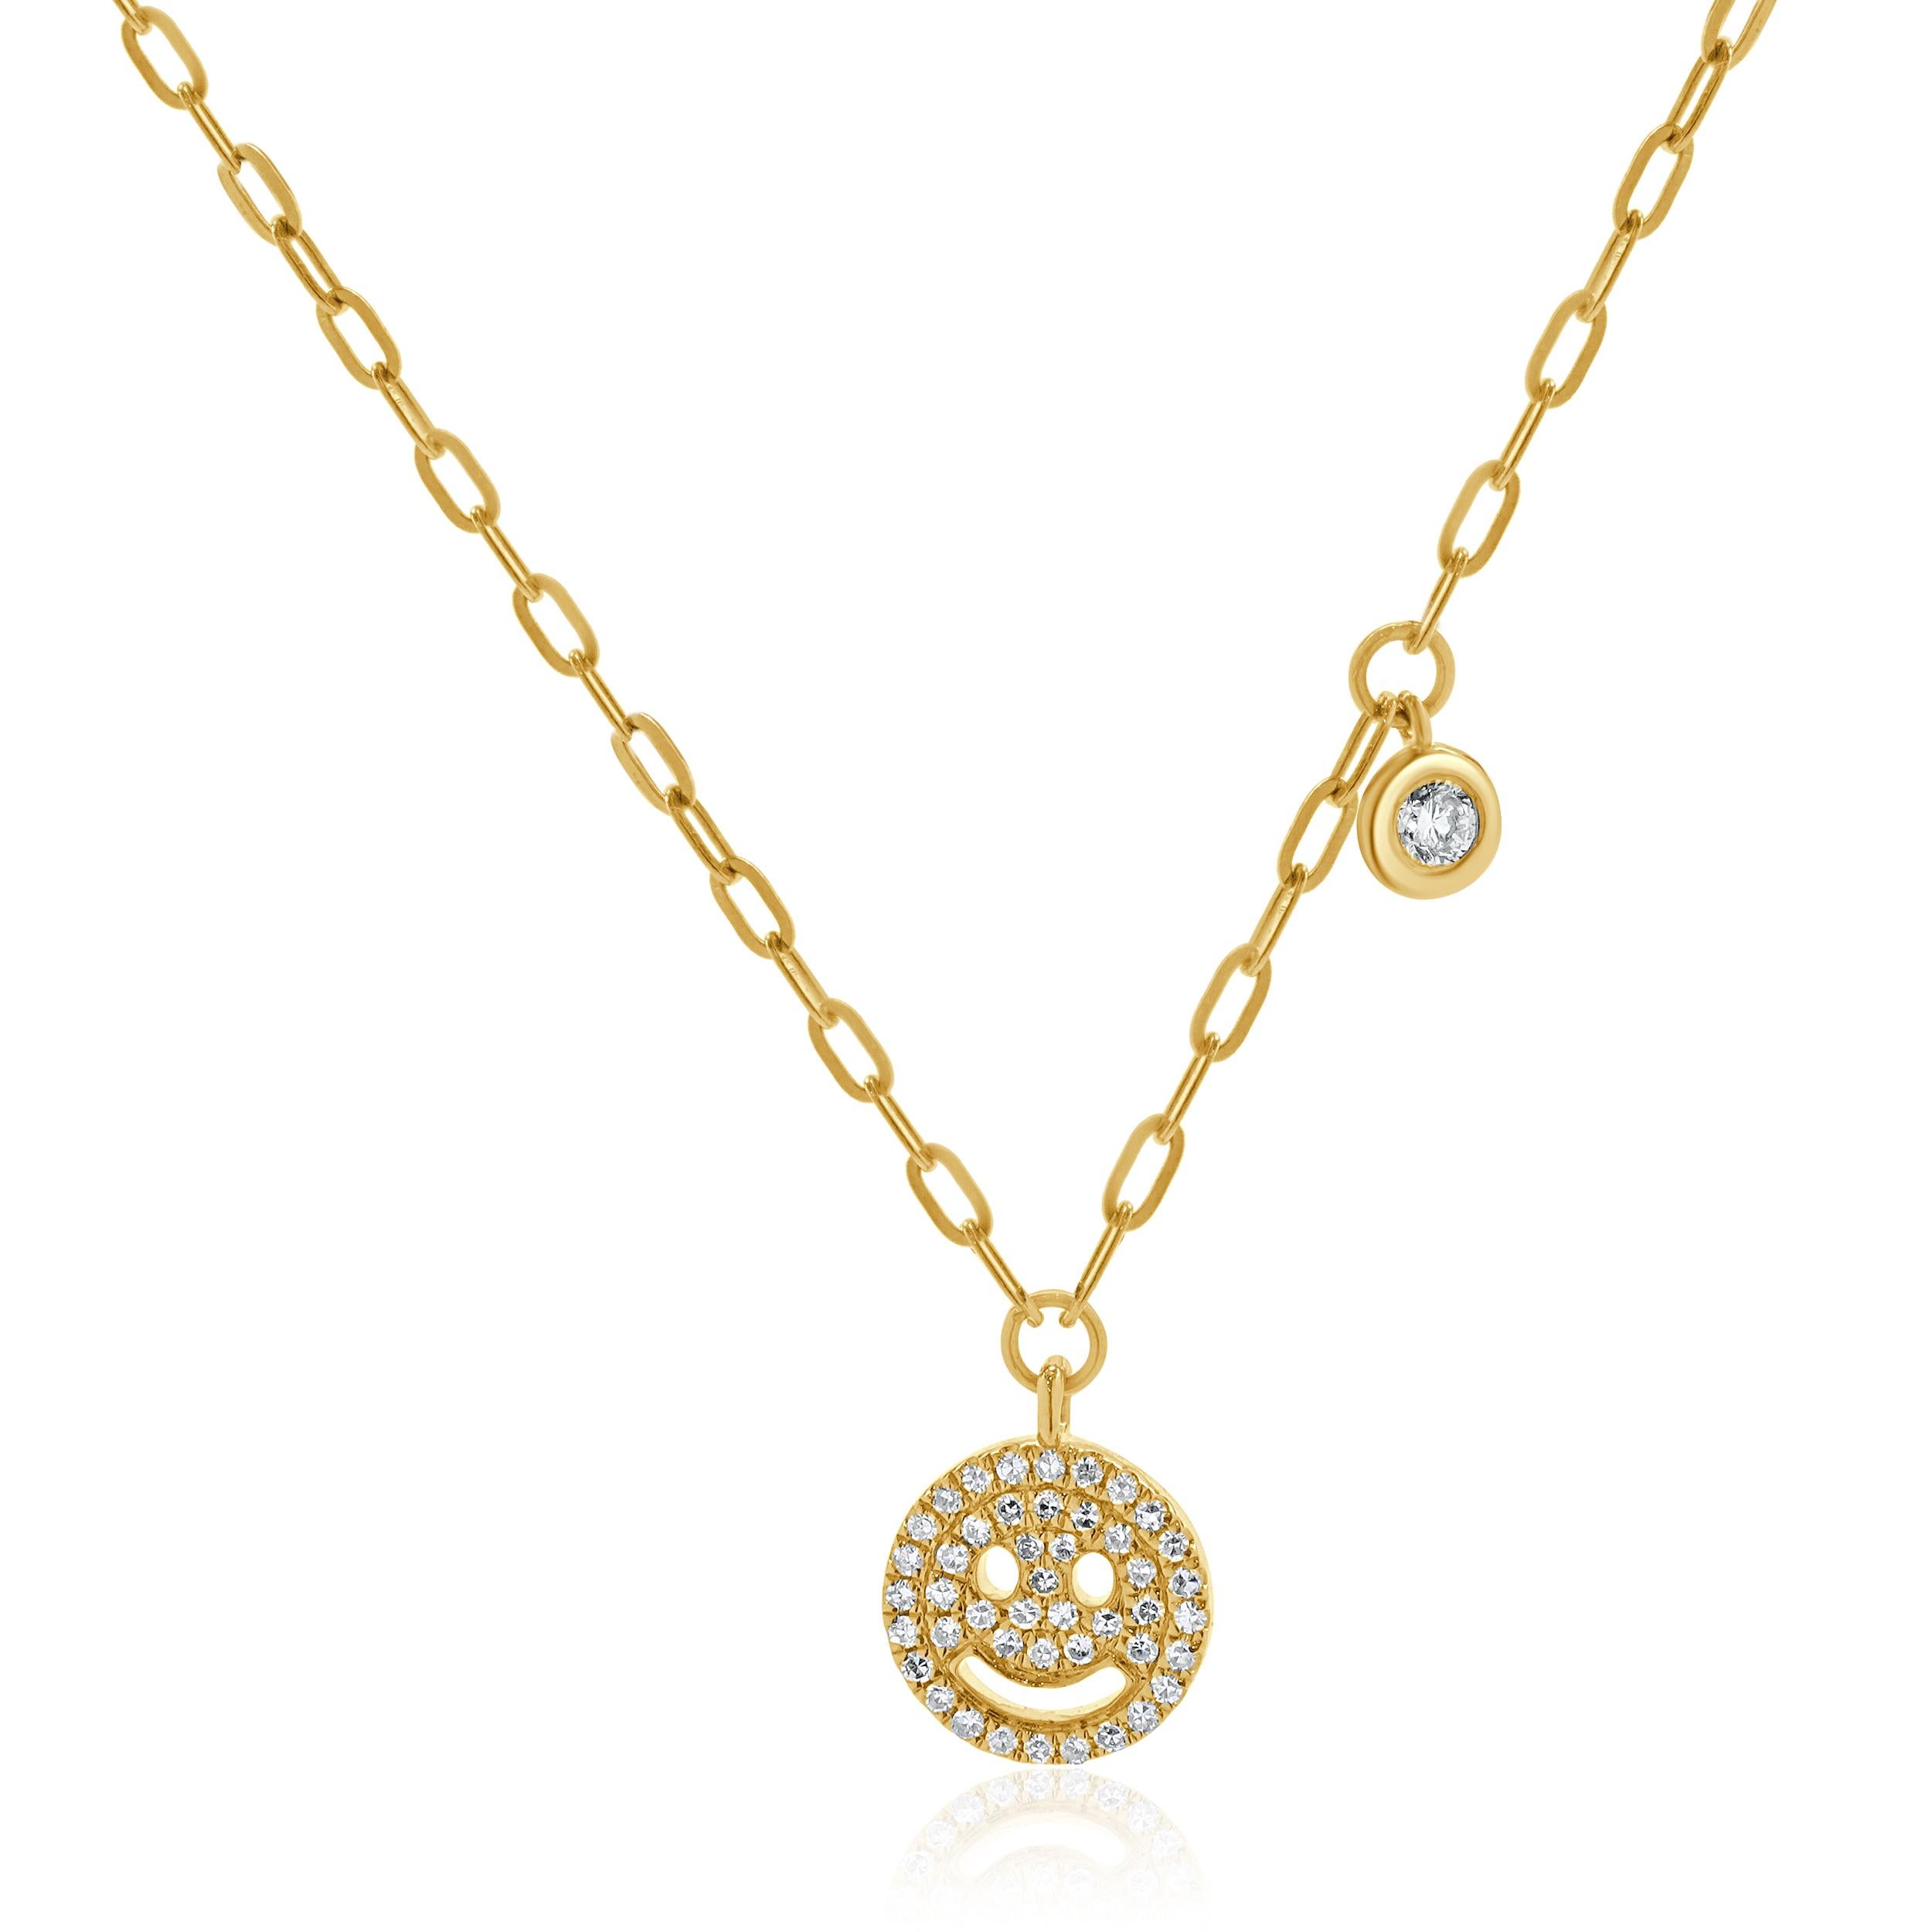 Designer: custom
Material: 14K yellow gold
Diamonds: 46 round brilliant Diamonds= 0.15cttw
Color: G-H
Clarity:VS-SI1
Dimensions: necklace measures 18-inches in length 
Weight: 2.81 grams
